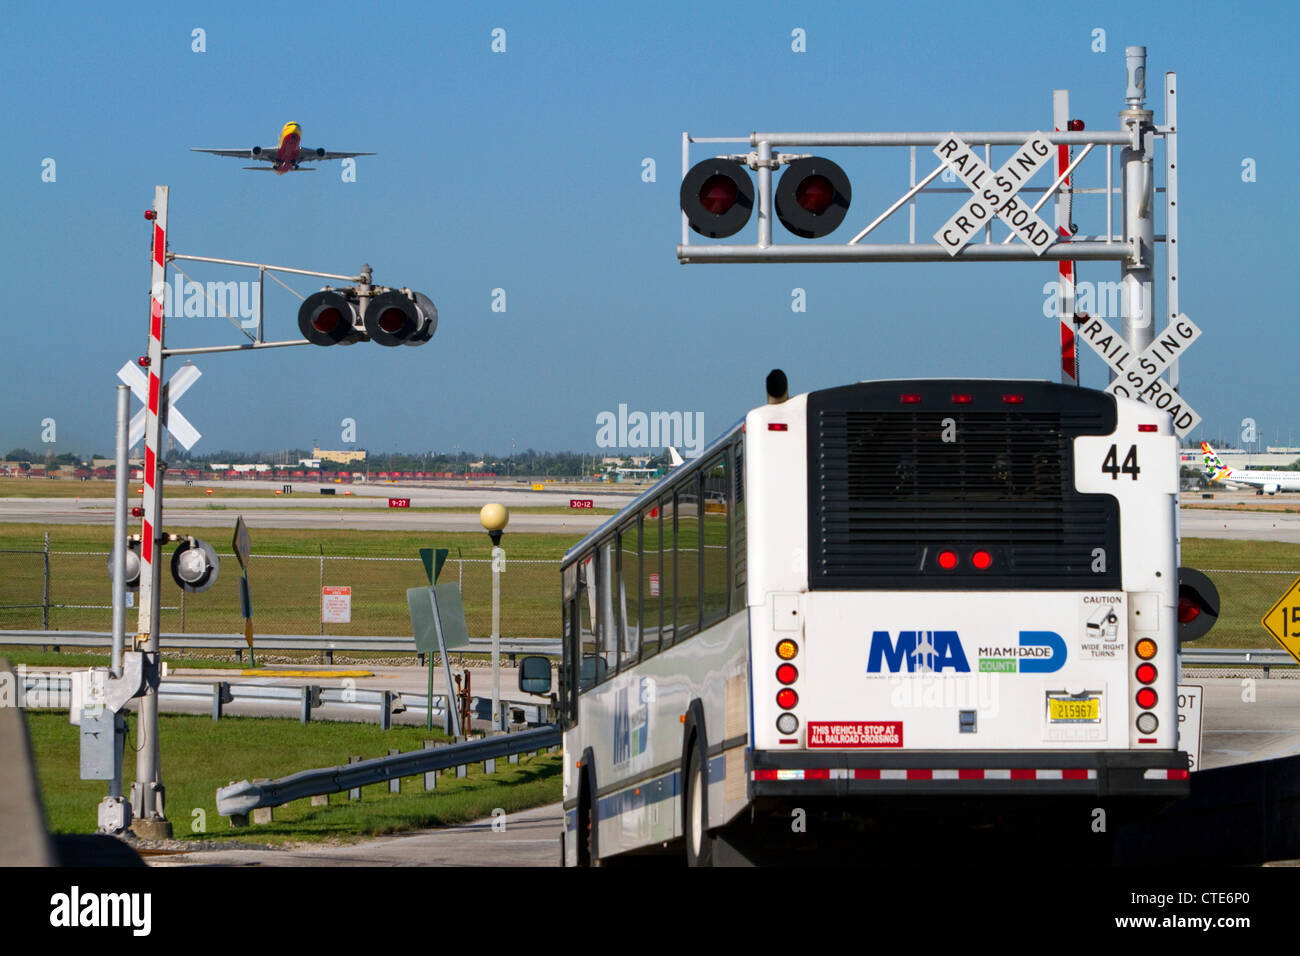 Boeing 737 at take off and a bus stopped at a railroad crossing at the Miami International Airport, Florida, USA. Stock Photo